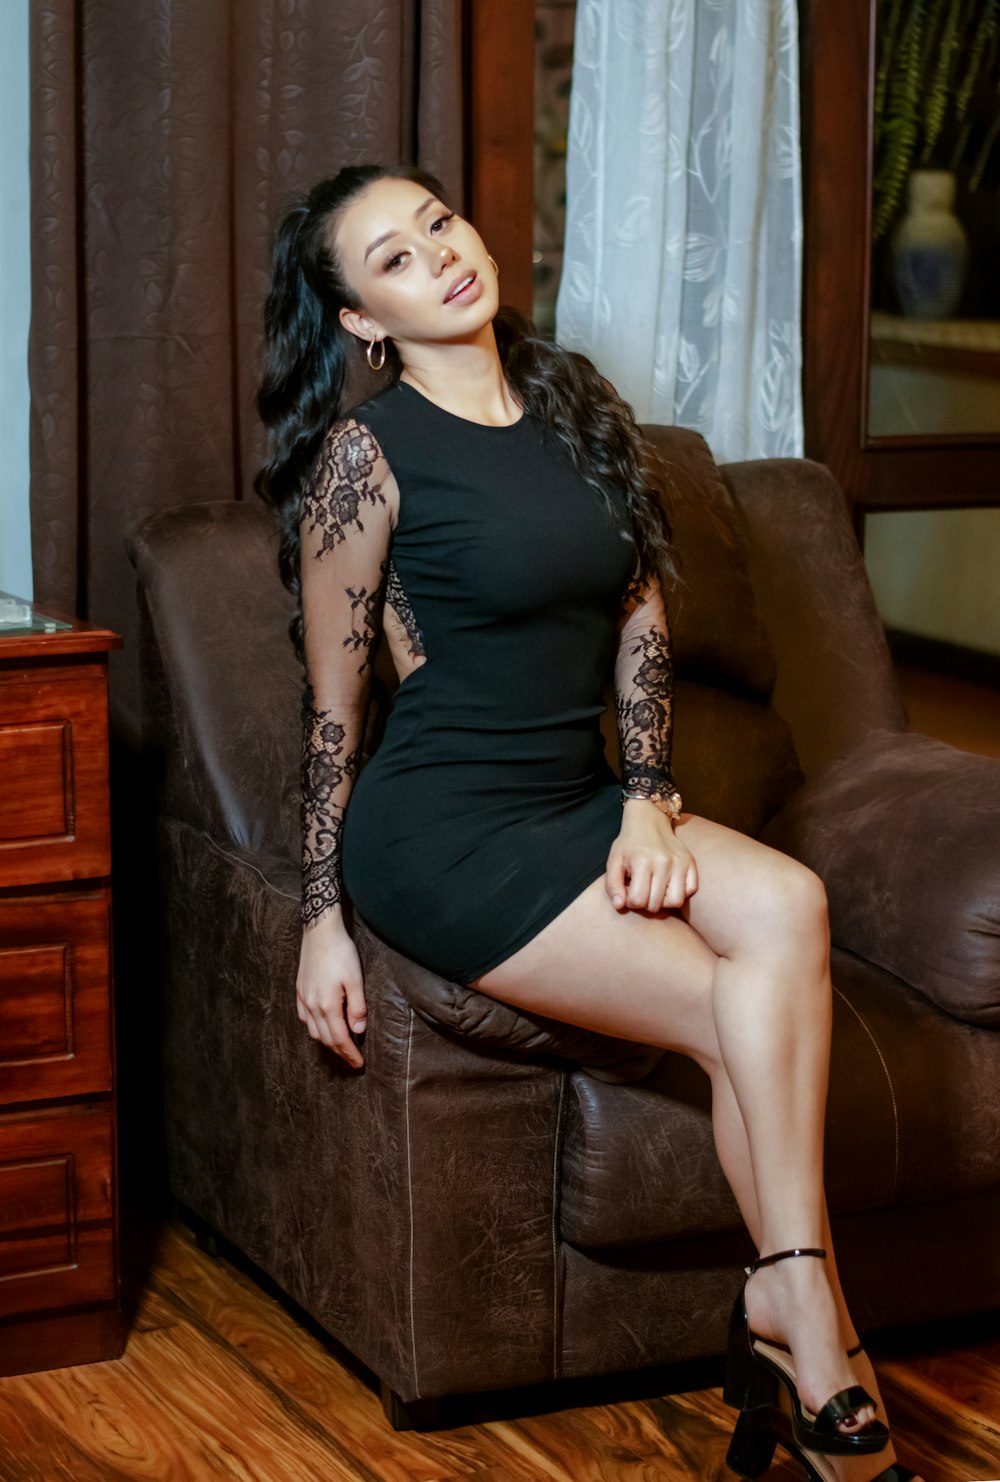 a woman in a black dress sitting on a brown couch